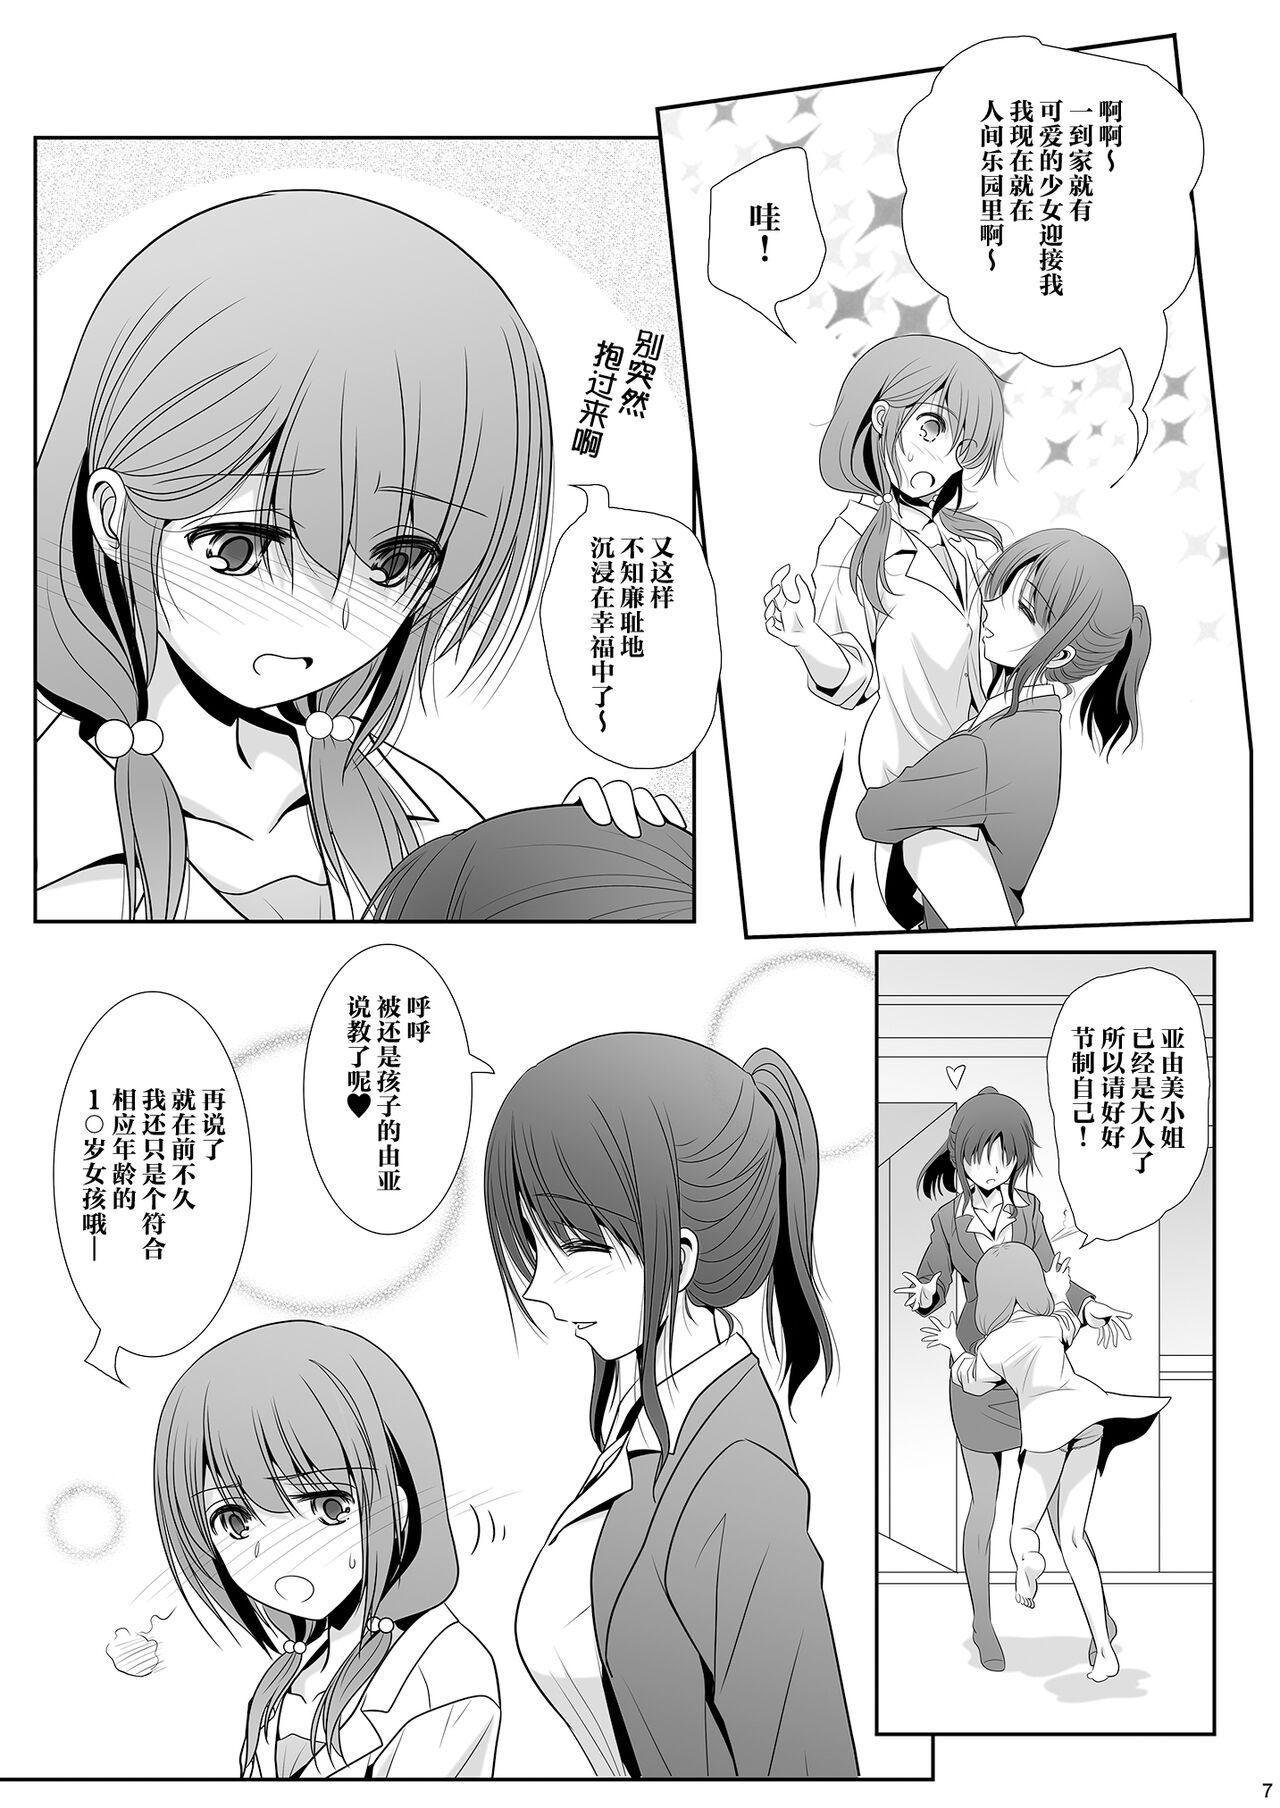 Legs Toshi no Thirteen - Age Difference is 13 Years | 少女间的年龄差 - Original Goldenshower - Page 7